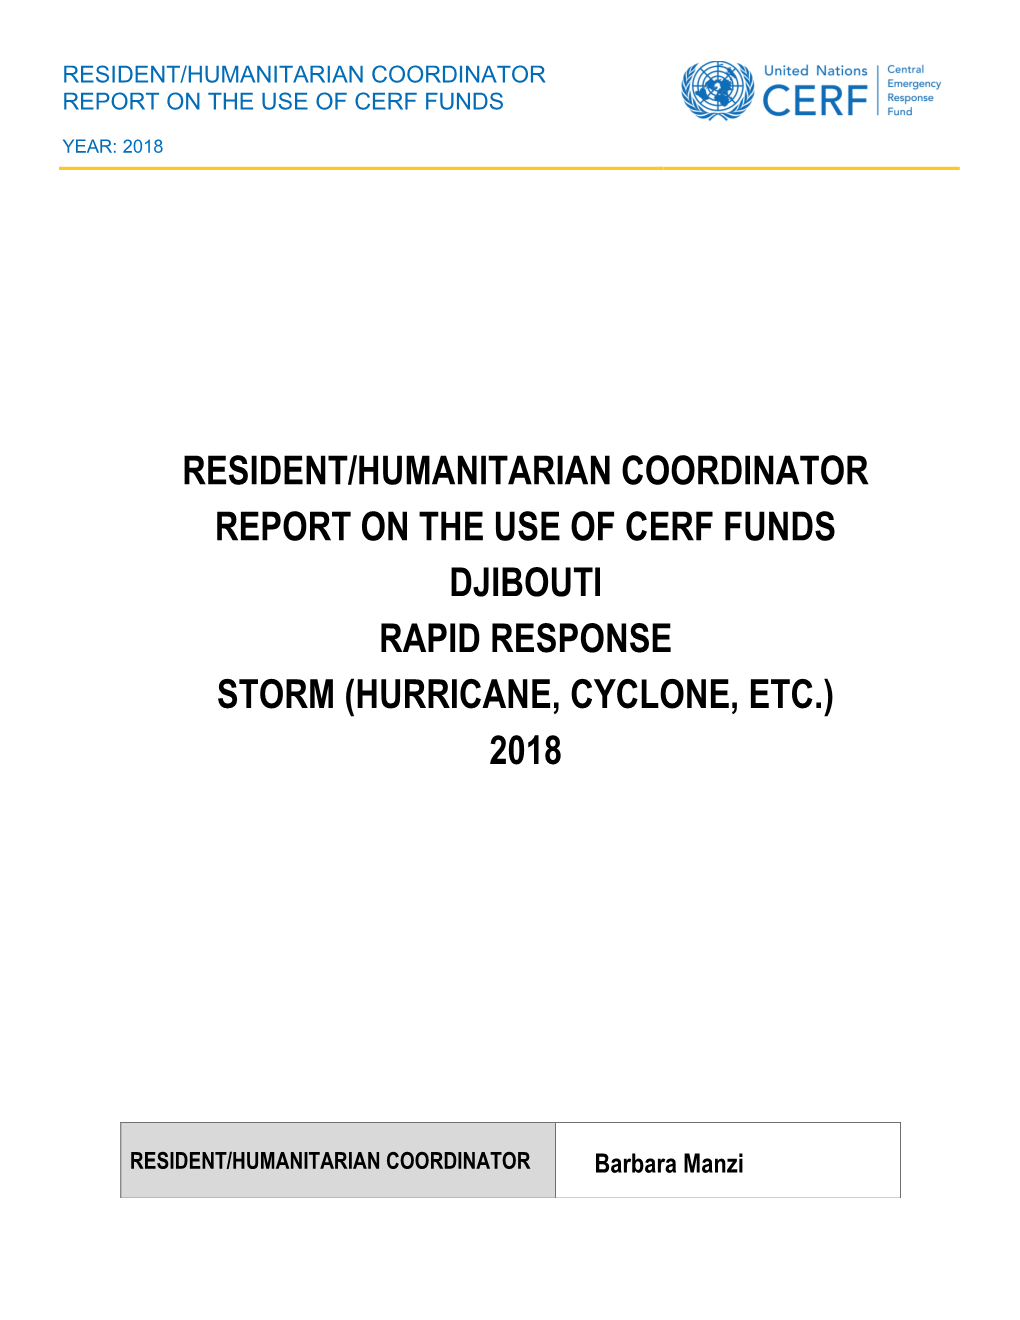 Resident/Humanitarian Coordinator Report on the Use of Cerf Funds Djibouti Rapid Response Storm (Hurricane, Cyclone, Etc.) 2018